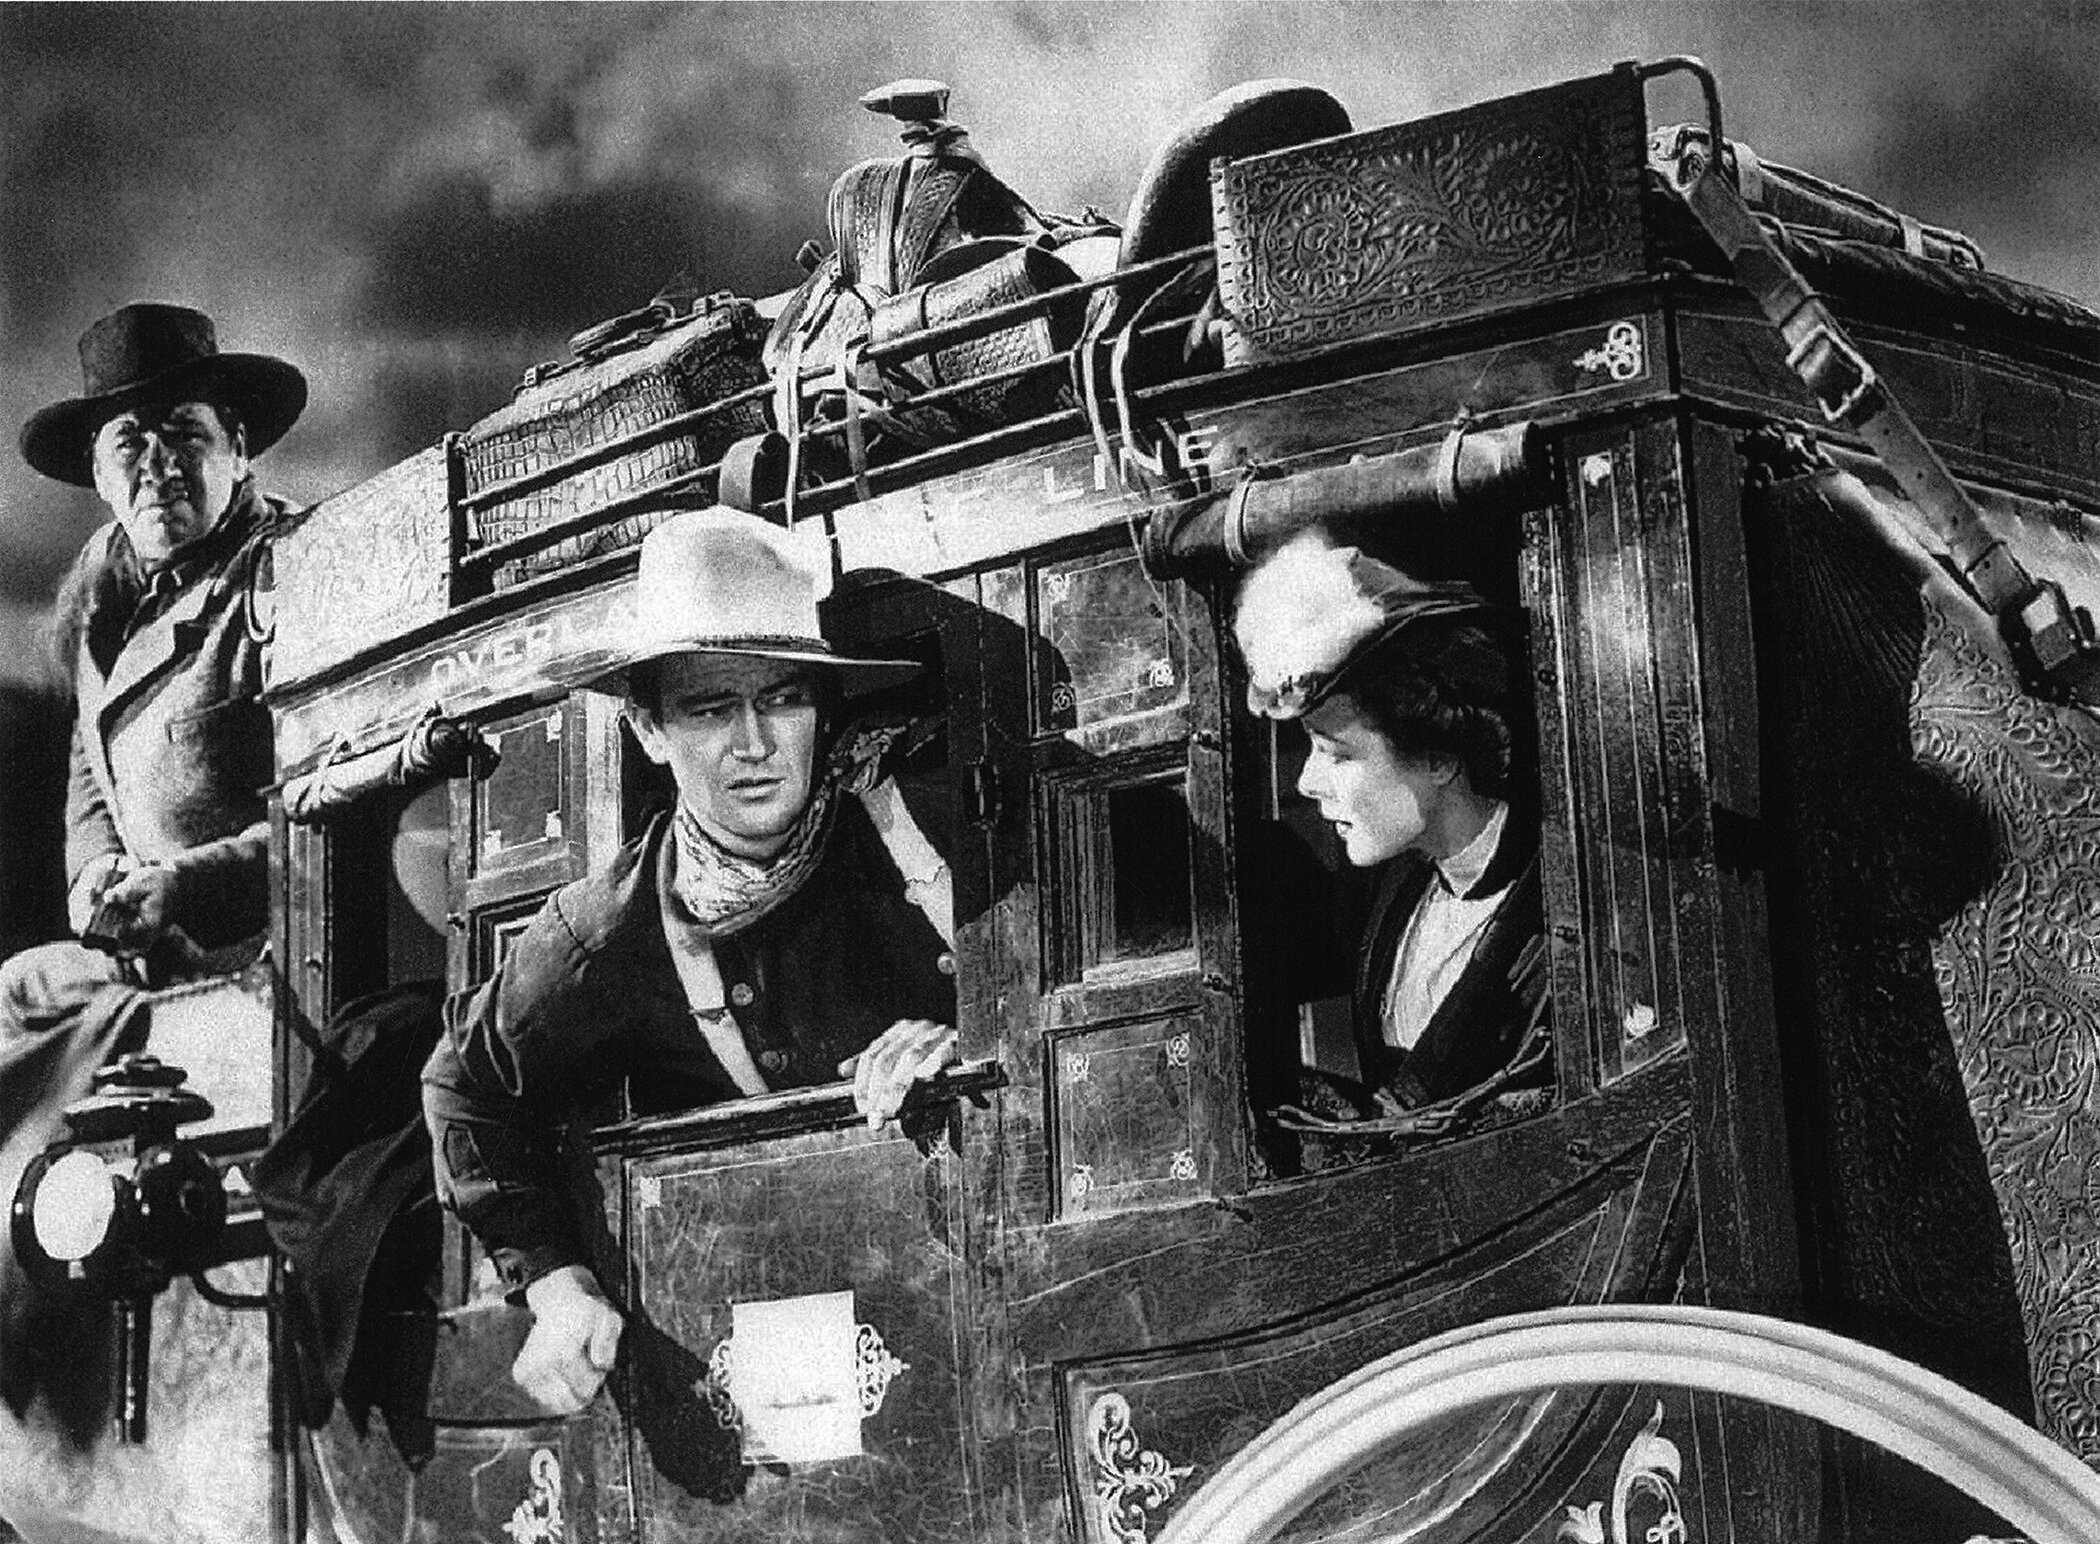 John Wayne in 1939’s western film Stagecoach directed by John Ford.